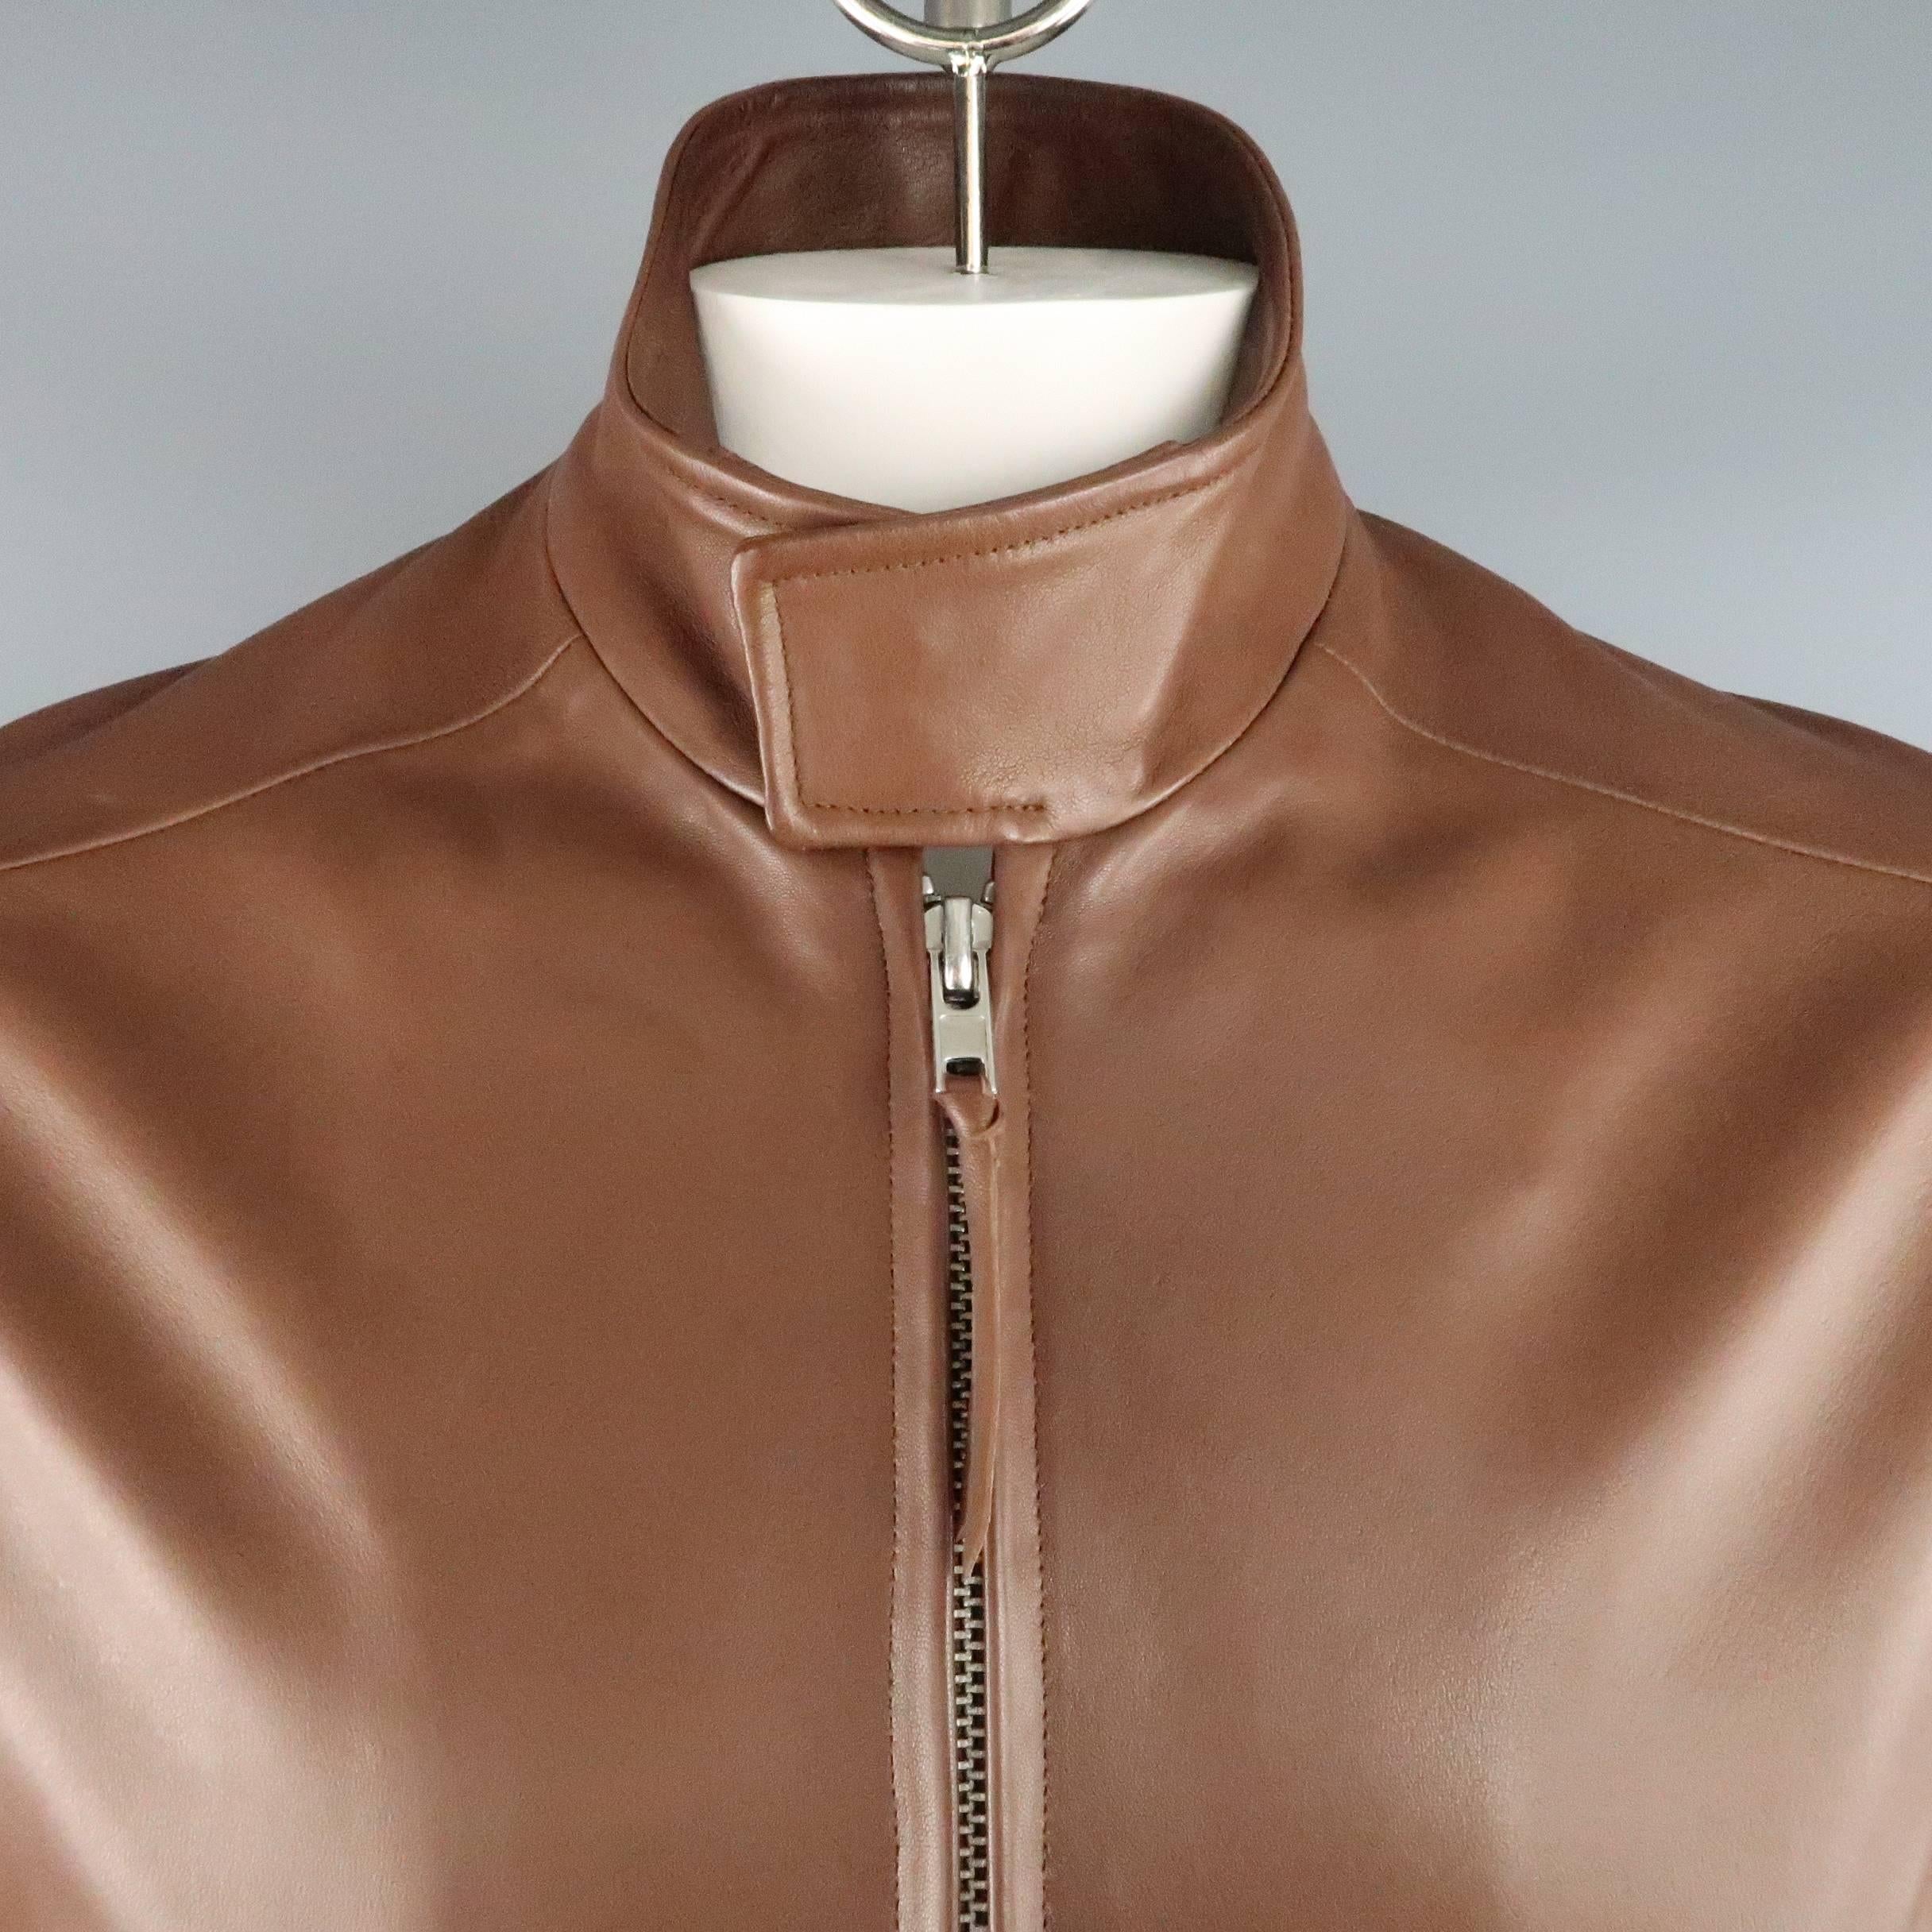 GOLDEN BEAR bomber jacket comes in light brown smooth leather and features a high snap over collar, double zip front, snap cuffs, and hidden snap flap pockets. Some spots throughout leather.. Made in USA.
 
Good Pre-Owned Condition.
Marked: M
